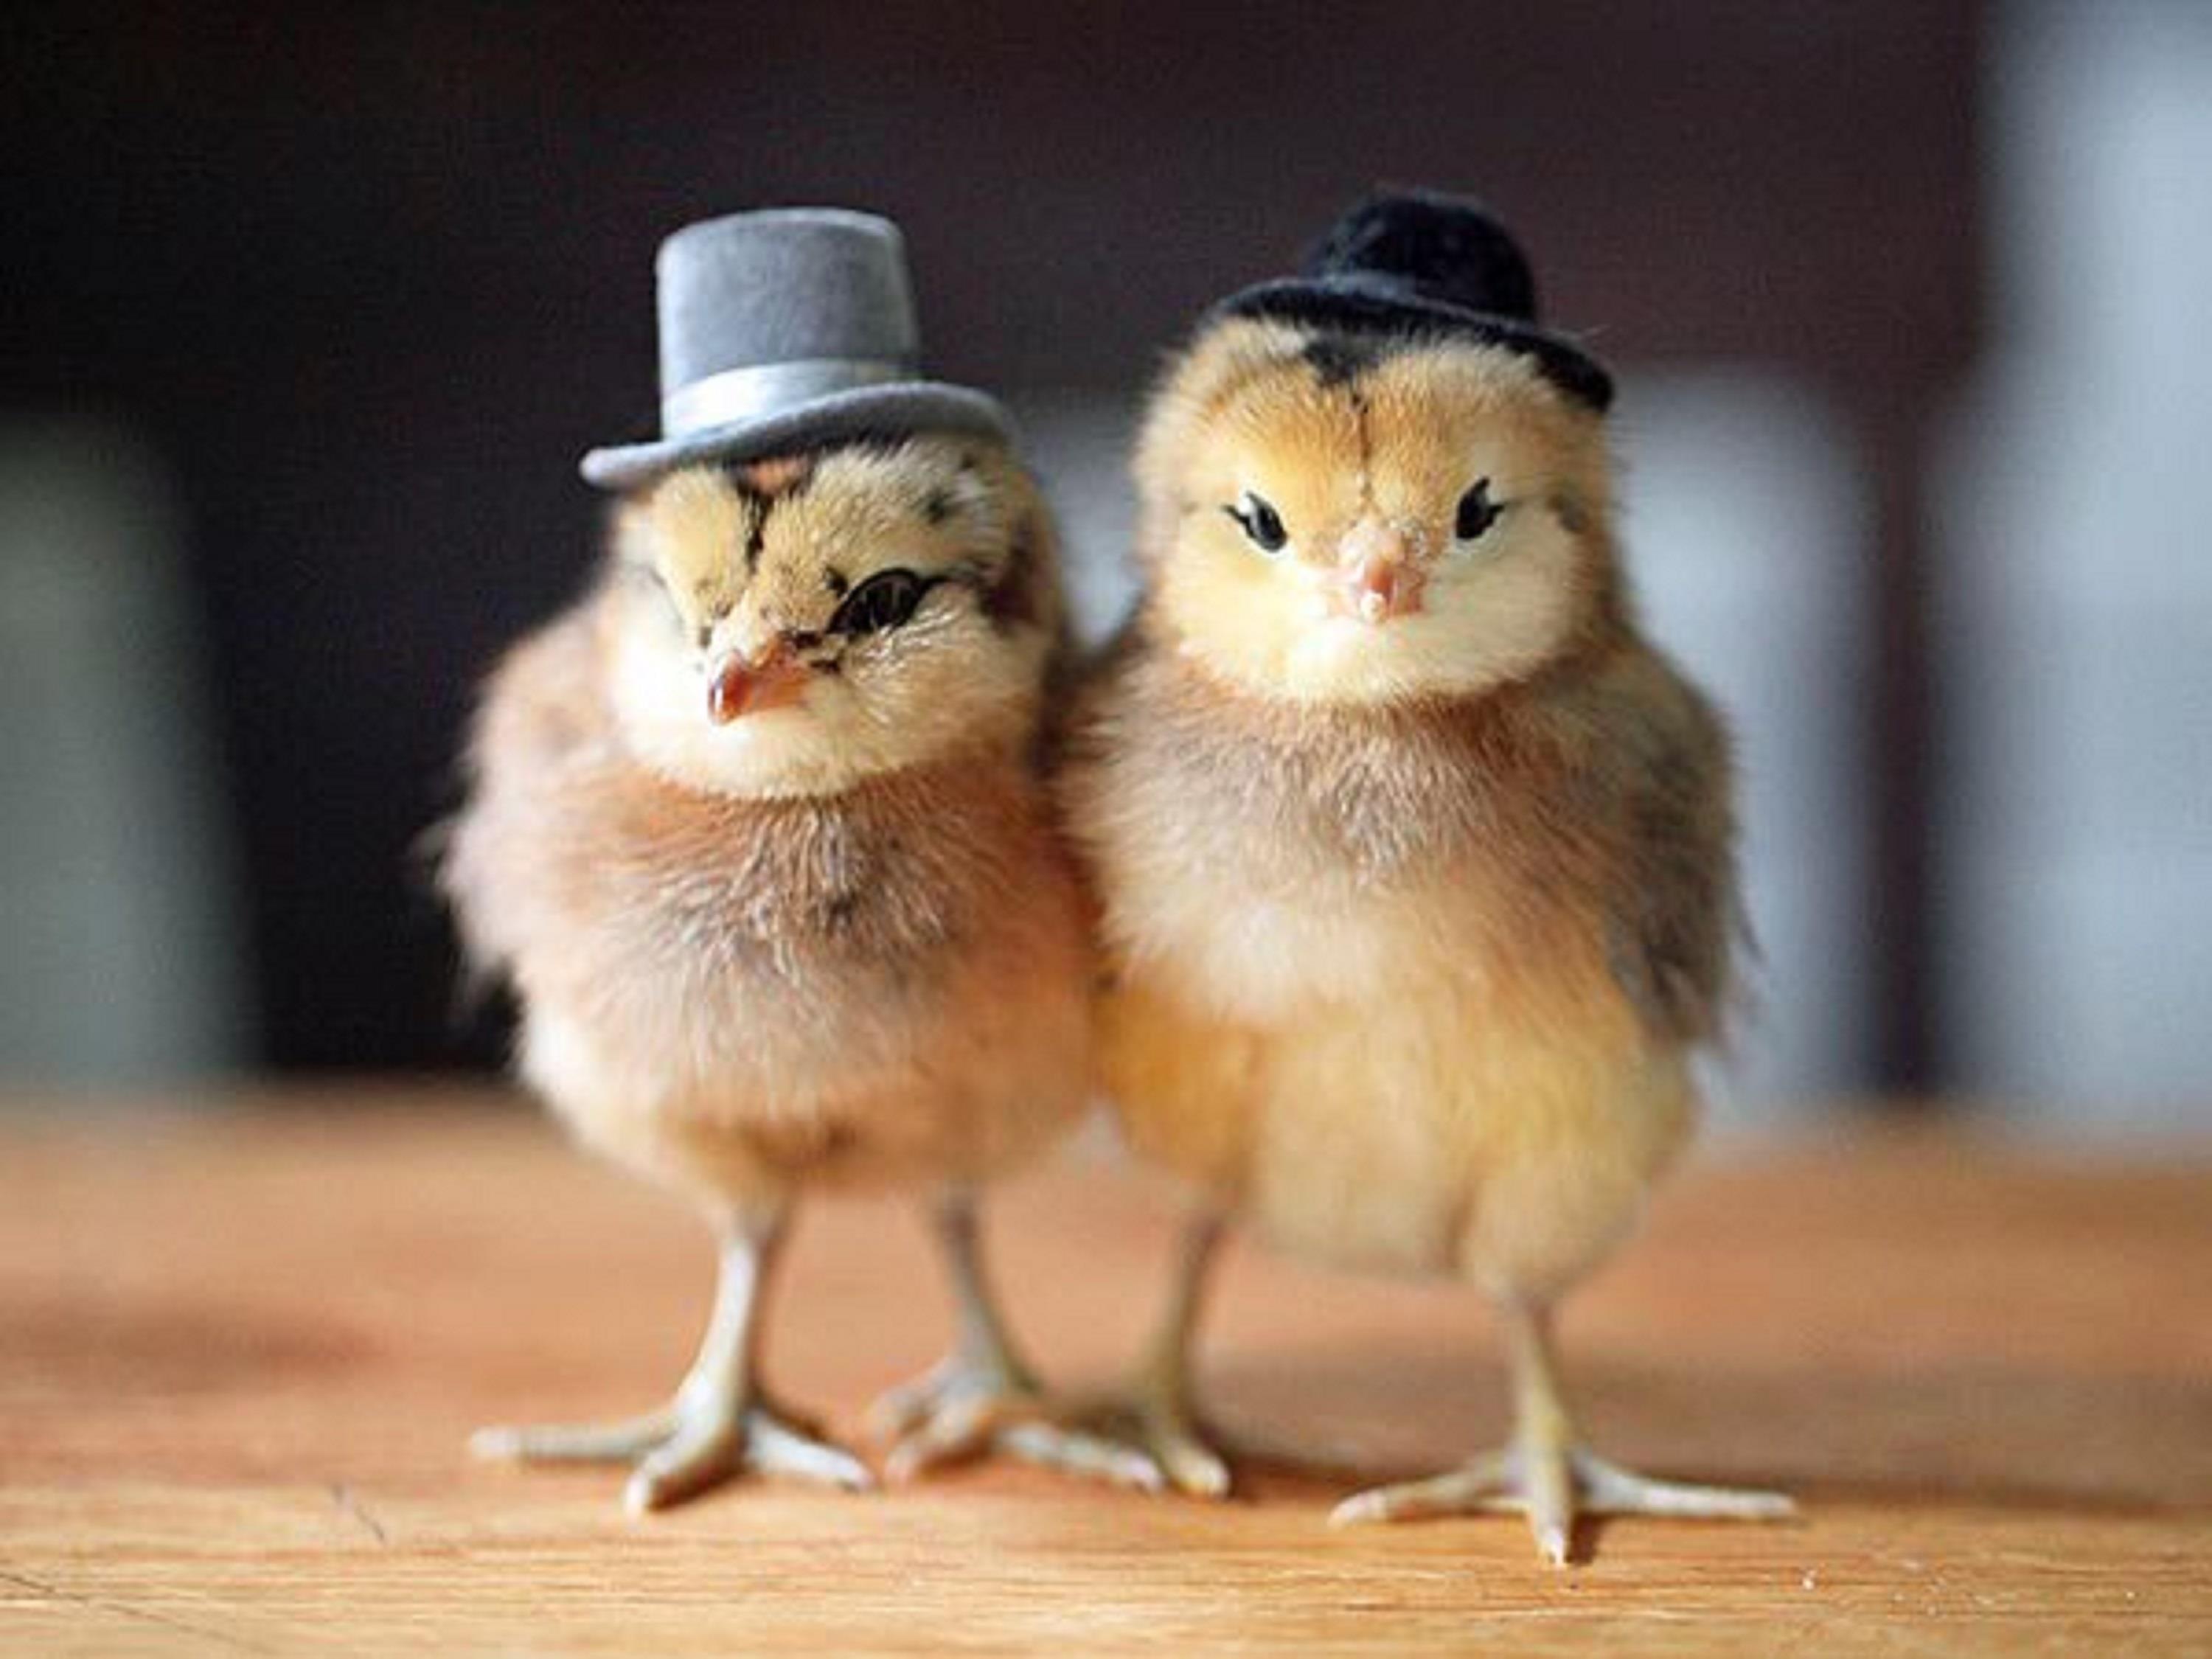 Funny Chicks Chickens With Hats Caps Pics